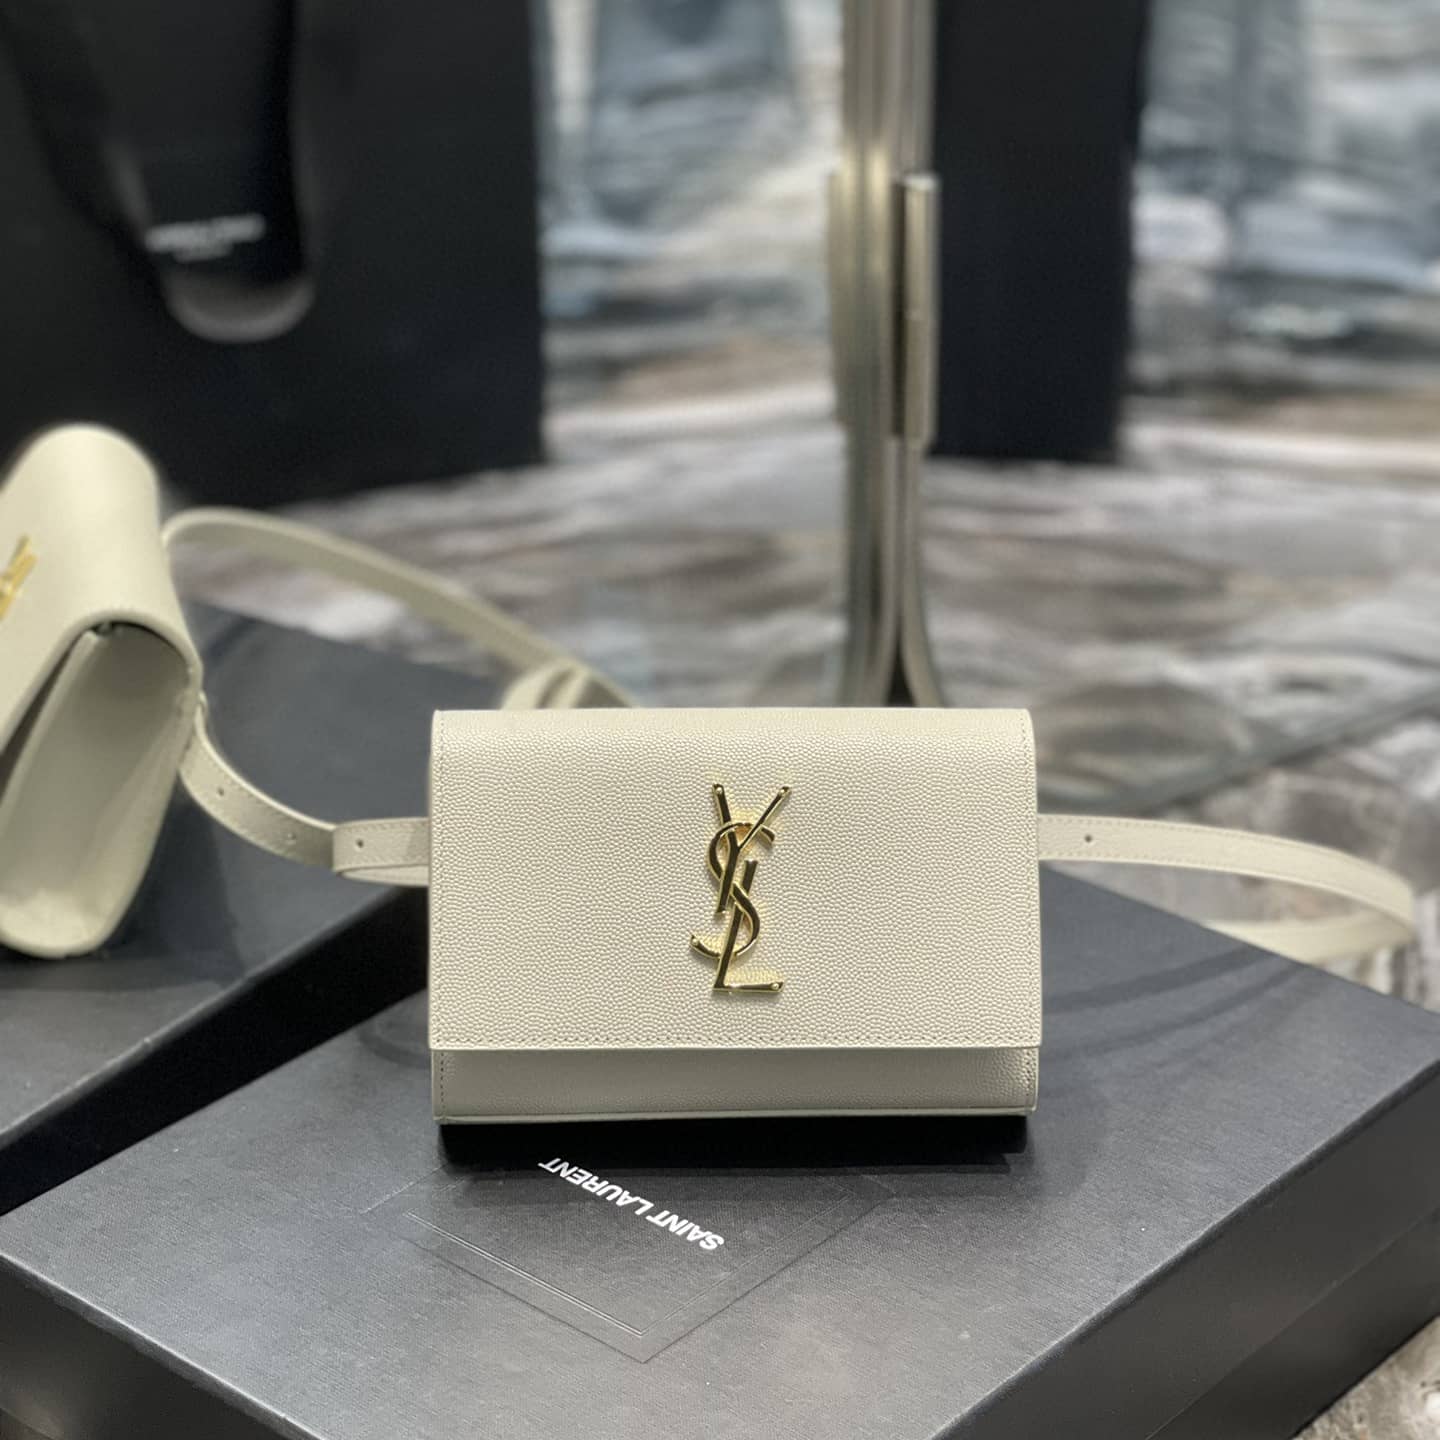 2021 Cheap Saint Laurent kate belt bag in smooth leather white